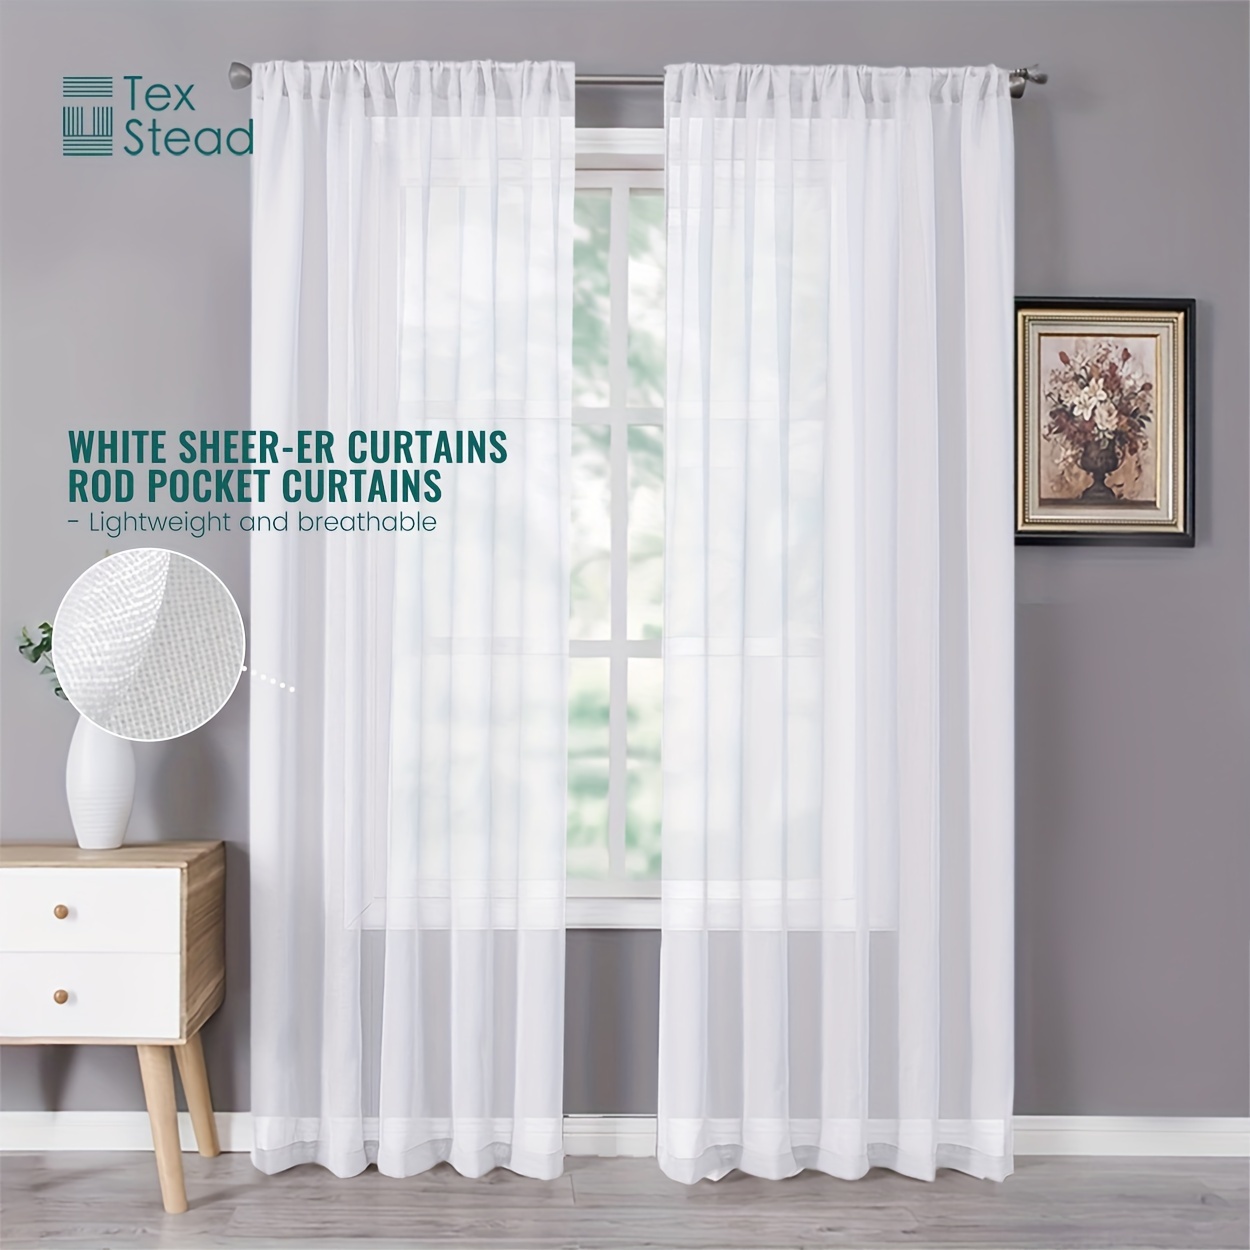 

2pcs/set, Sheer White Kitchen Curtains Cafe Curtain Boho Farmhouse Short Curtains For Bedroom Living Room Basement Window Rv Camper Home Decor